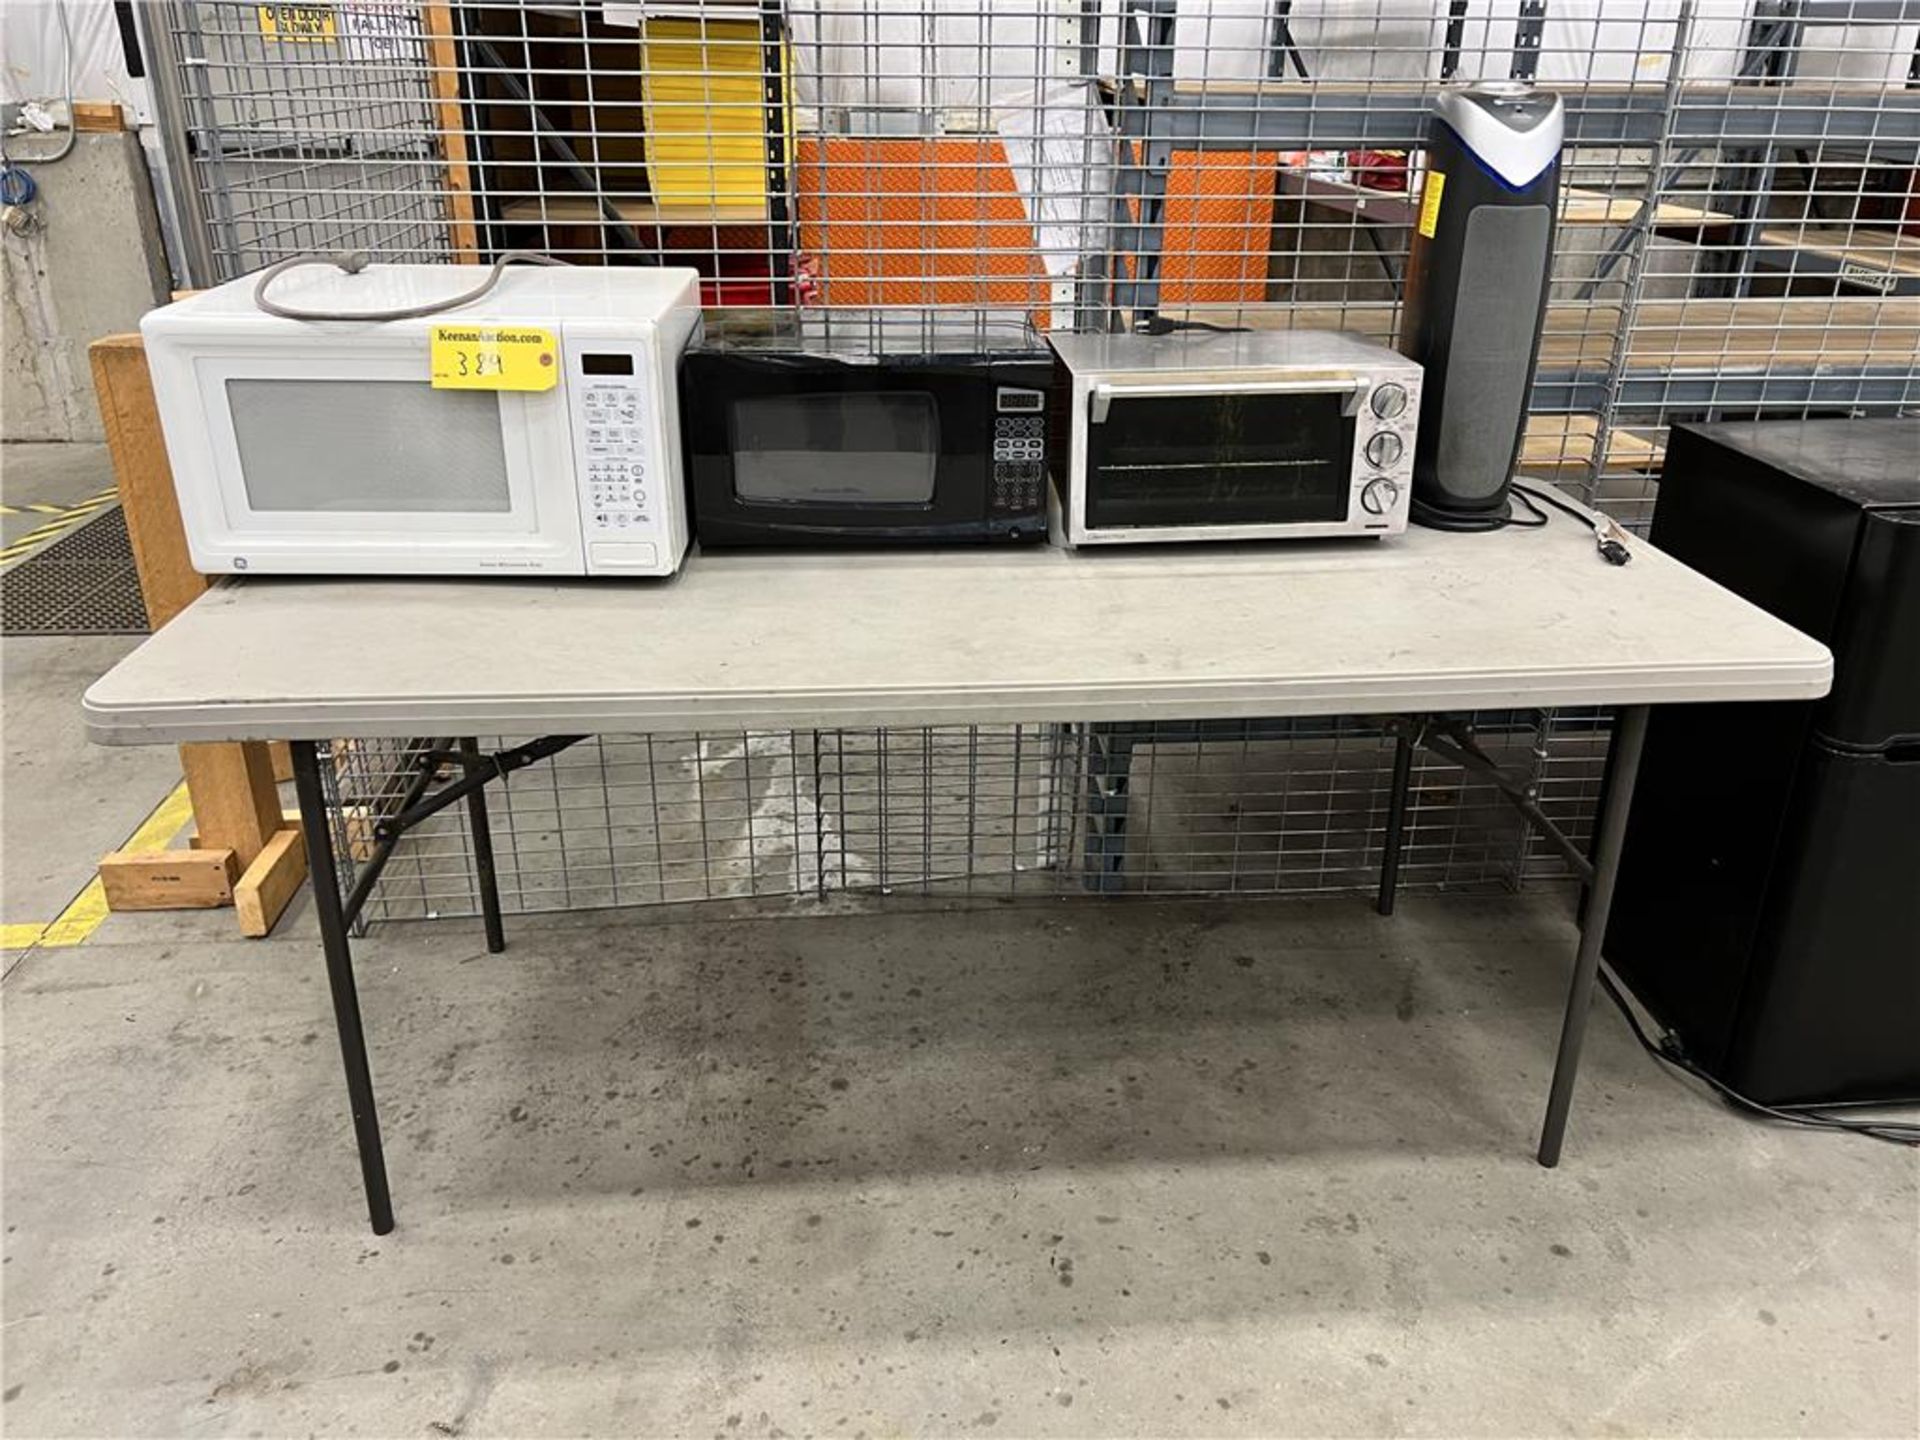 LOT: 2-MICROWAVES, TOASTER OVEN, FAN, 6' FOLDING TABLE